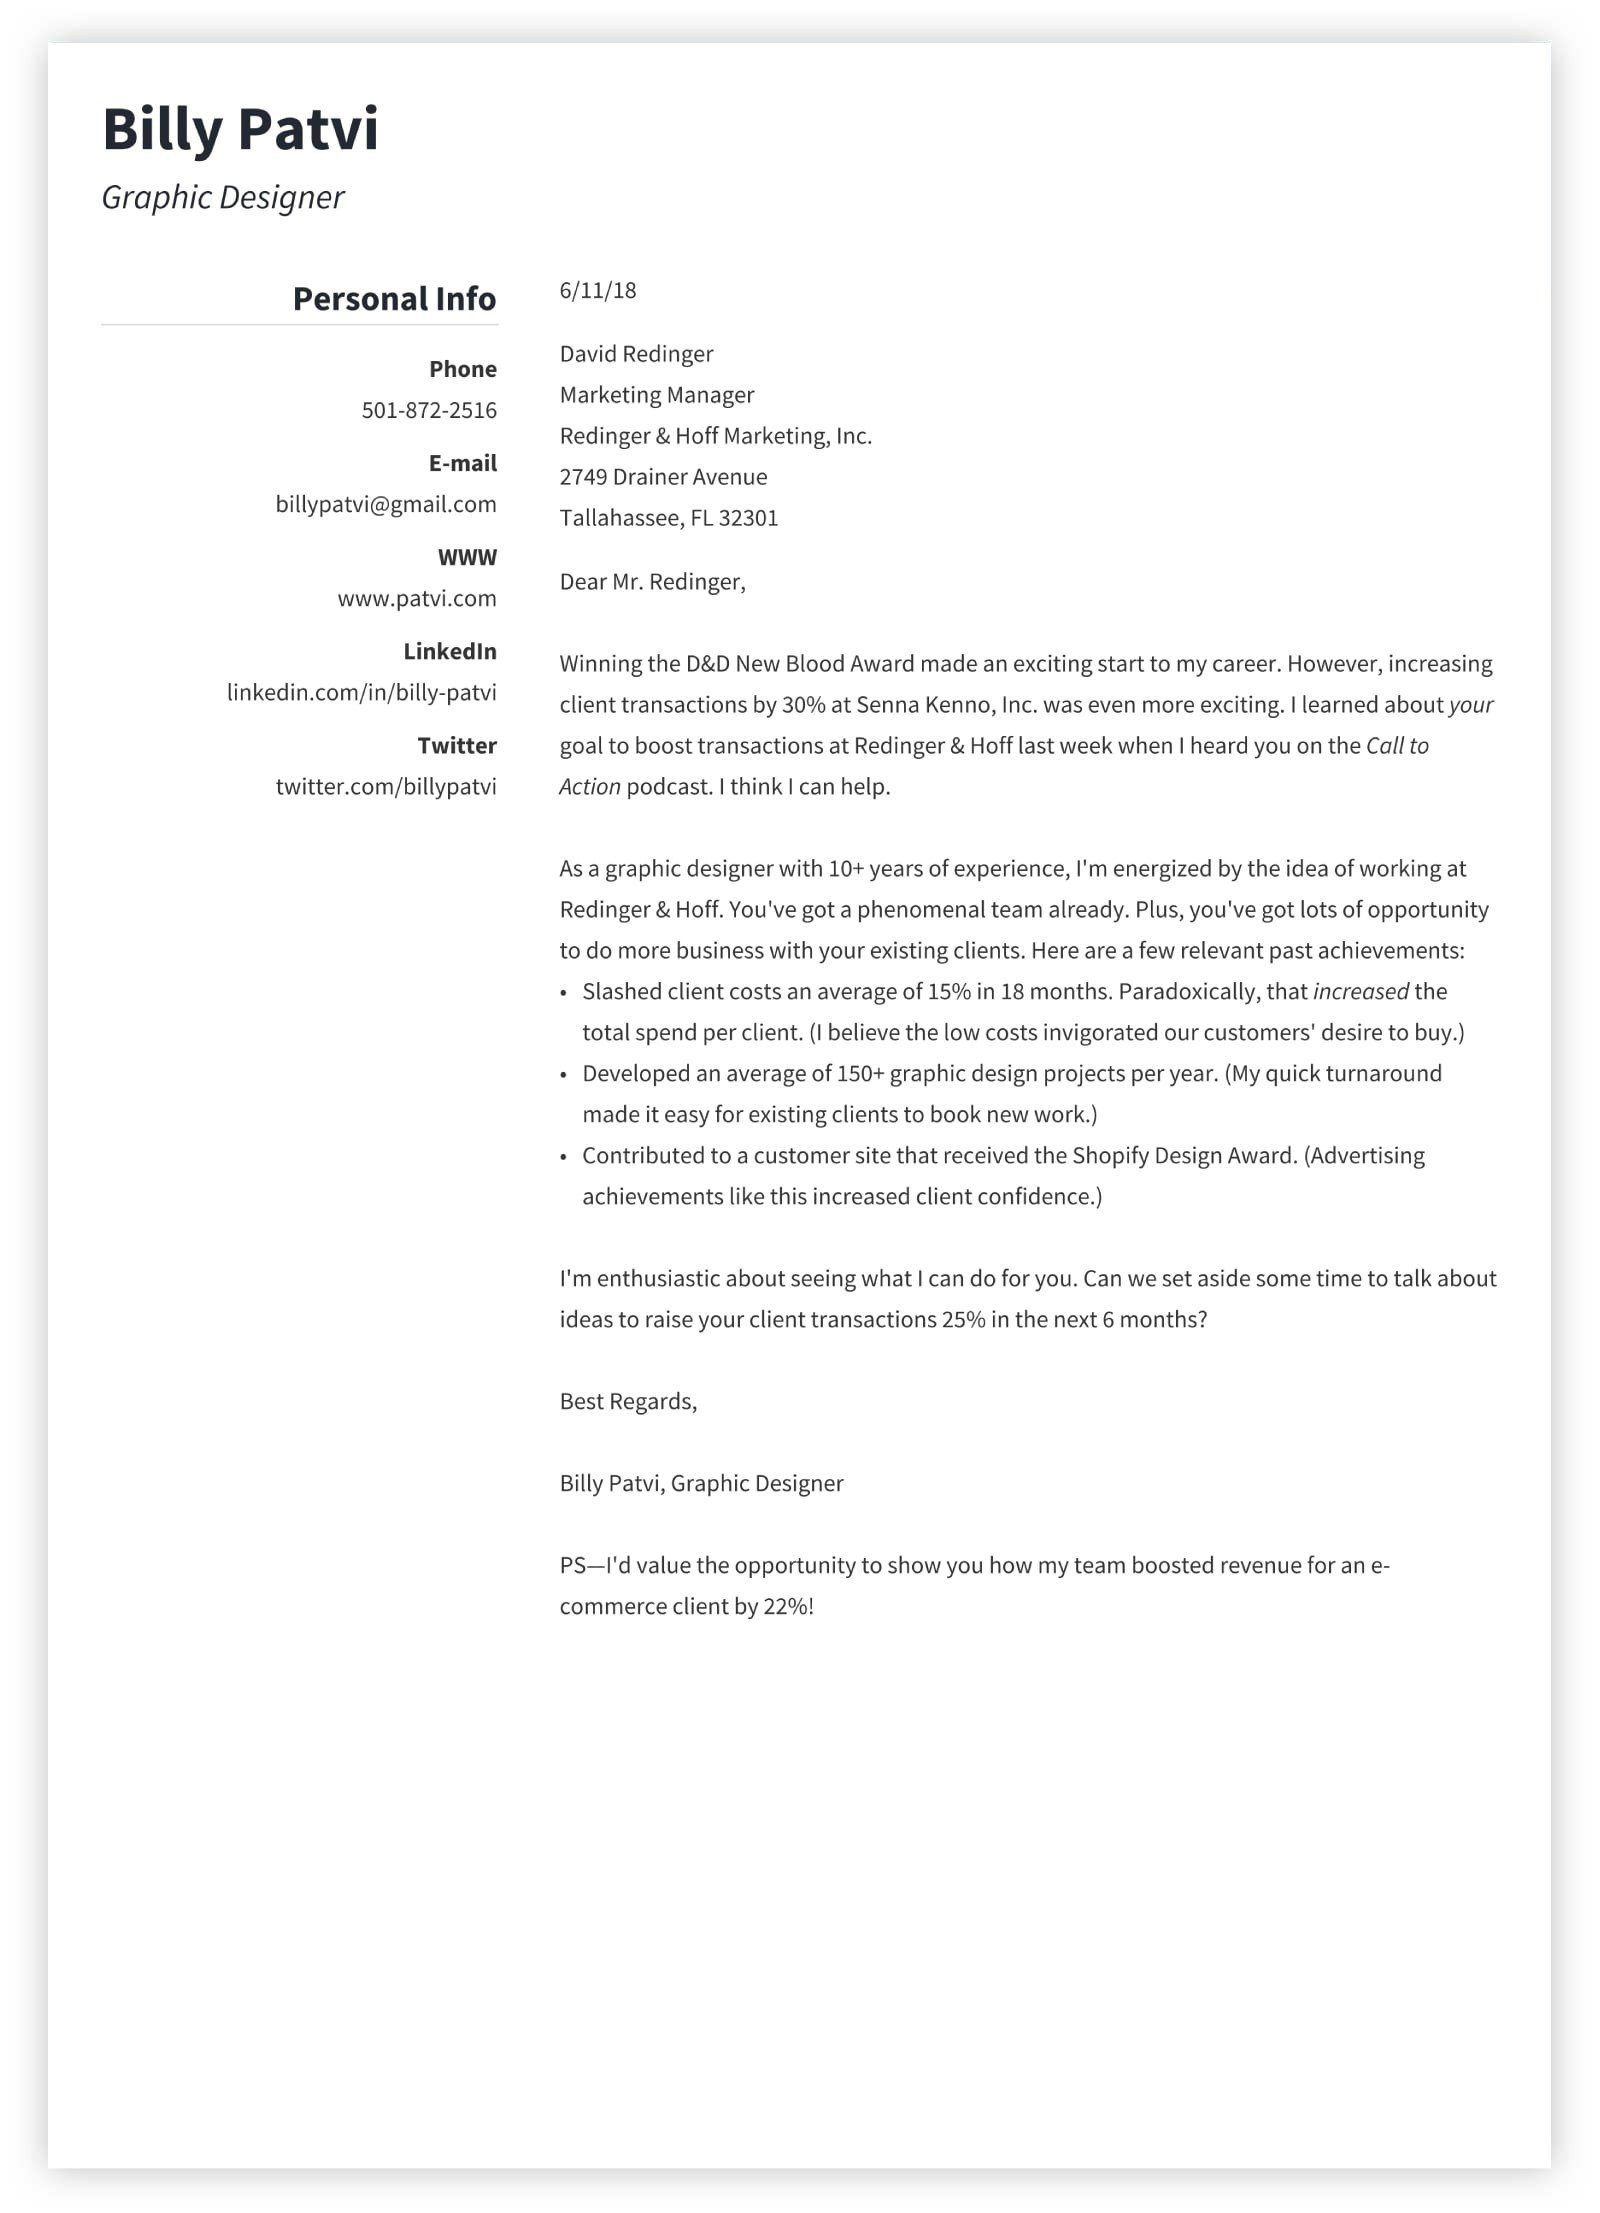 The Perfect Resume Cover Letter Sample How to Write A Cover Letter for Any Job In 8 Simple Steps